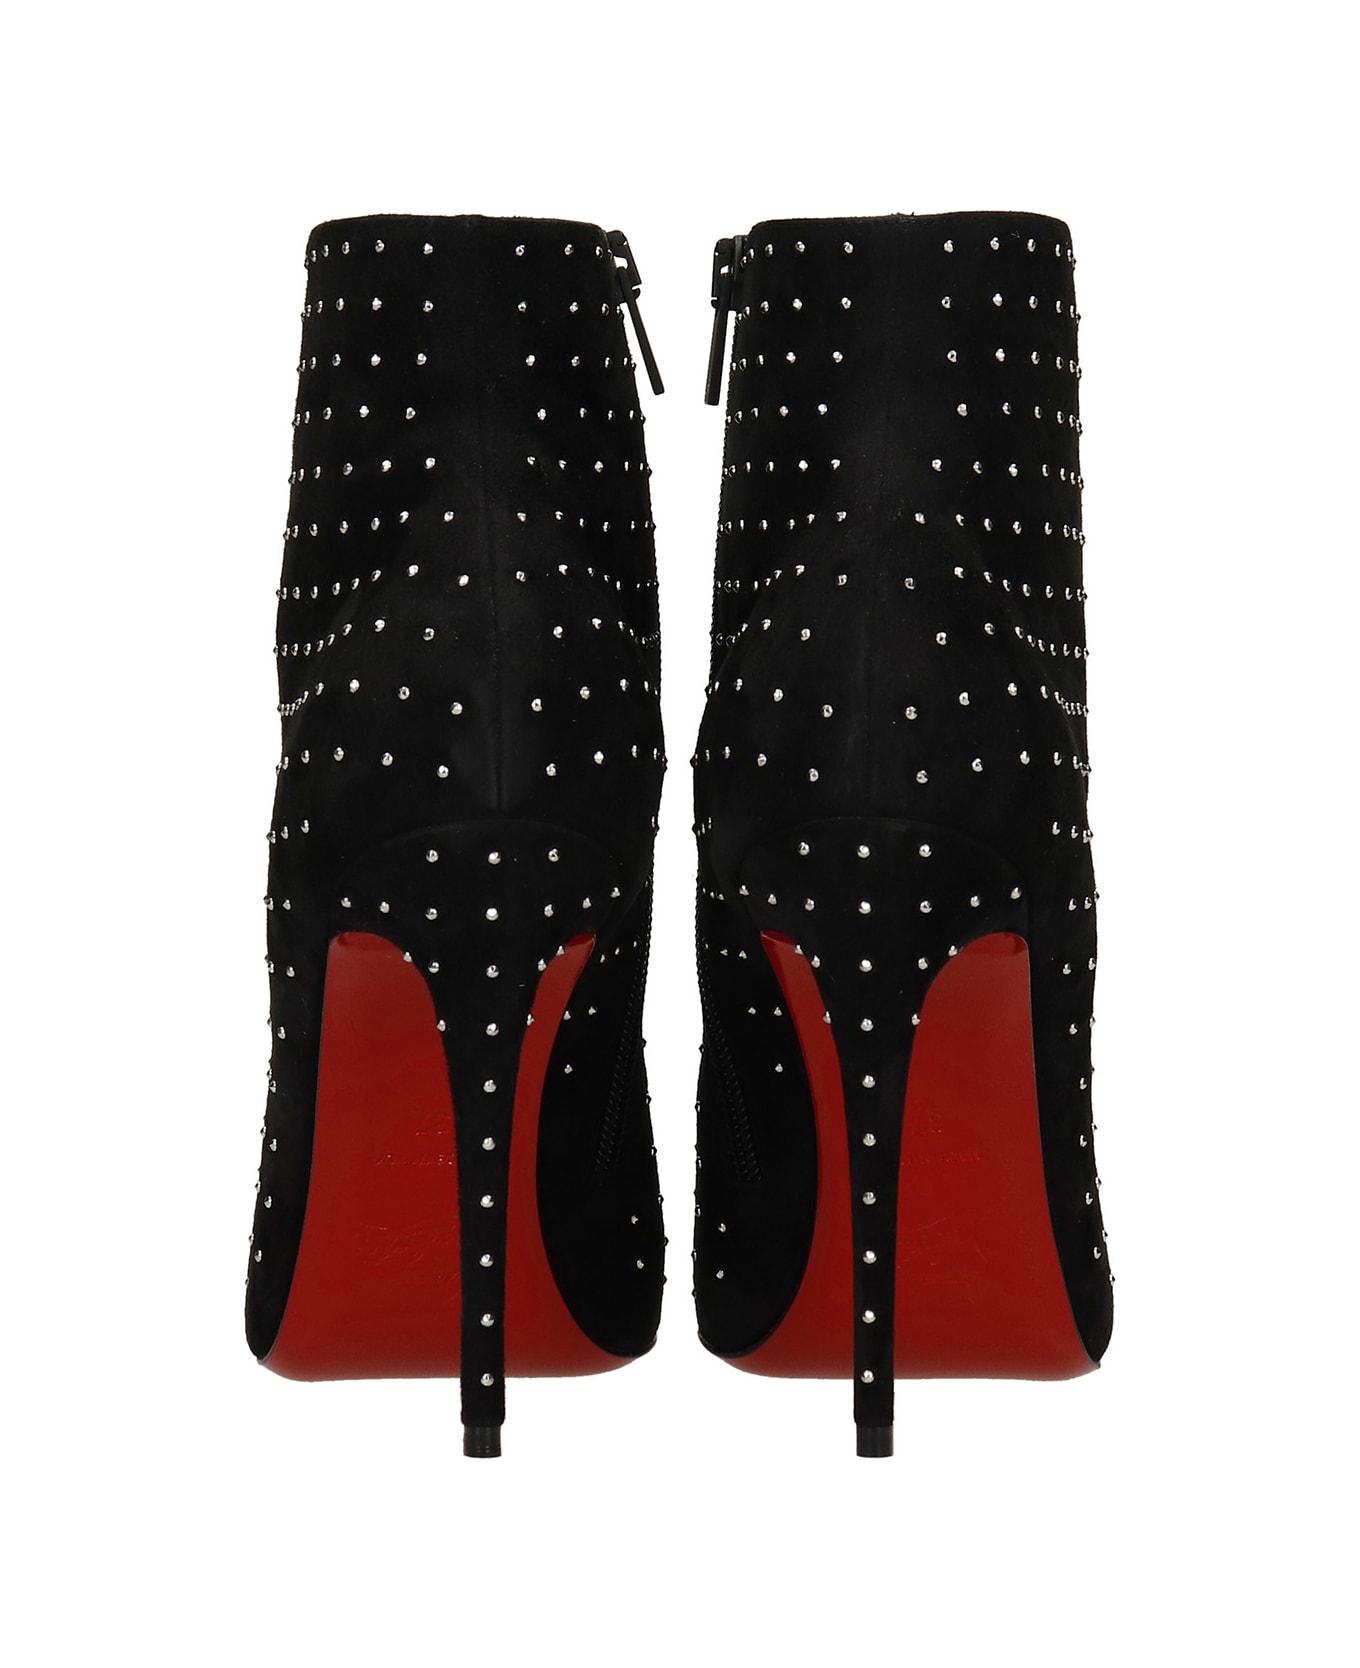 Christian Louboutin So Kate Booty High Heels Ankle Boots In Black Suede - black